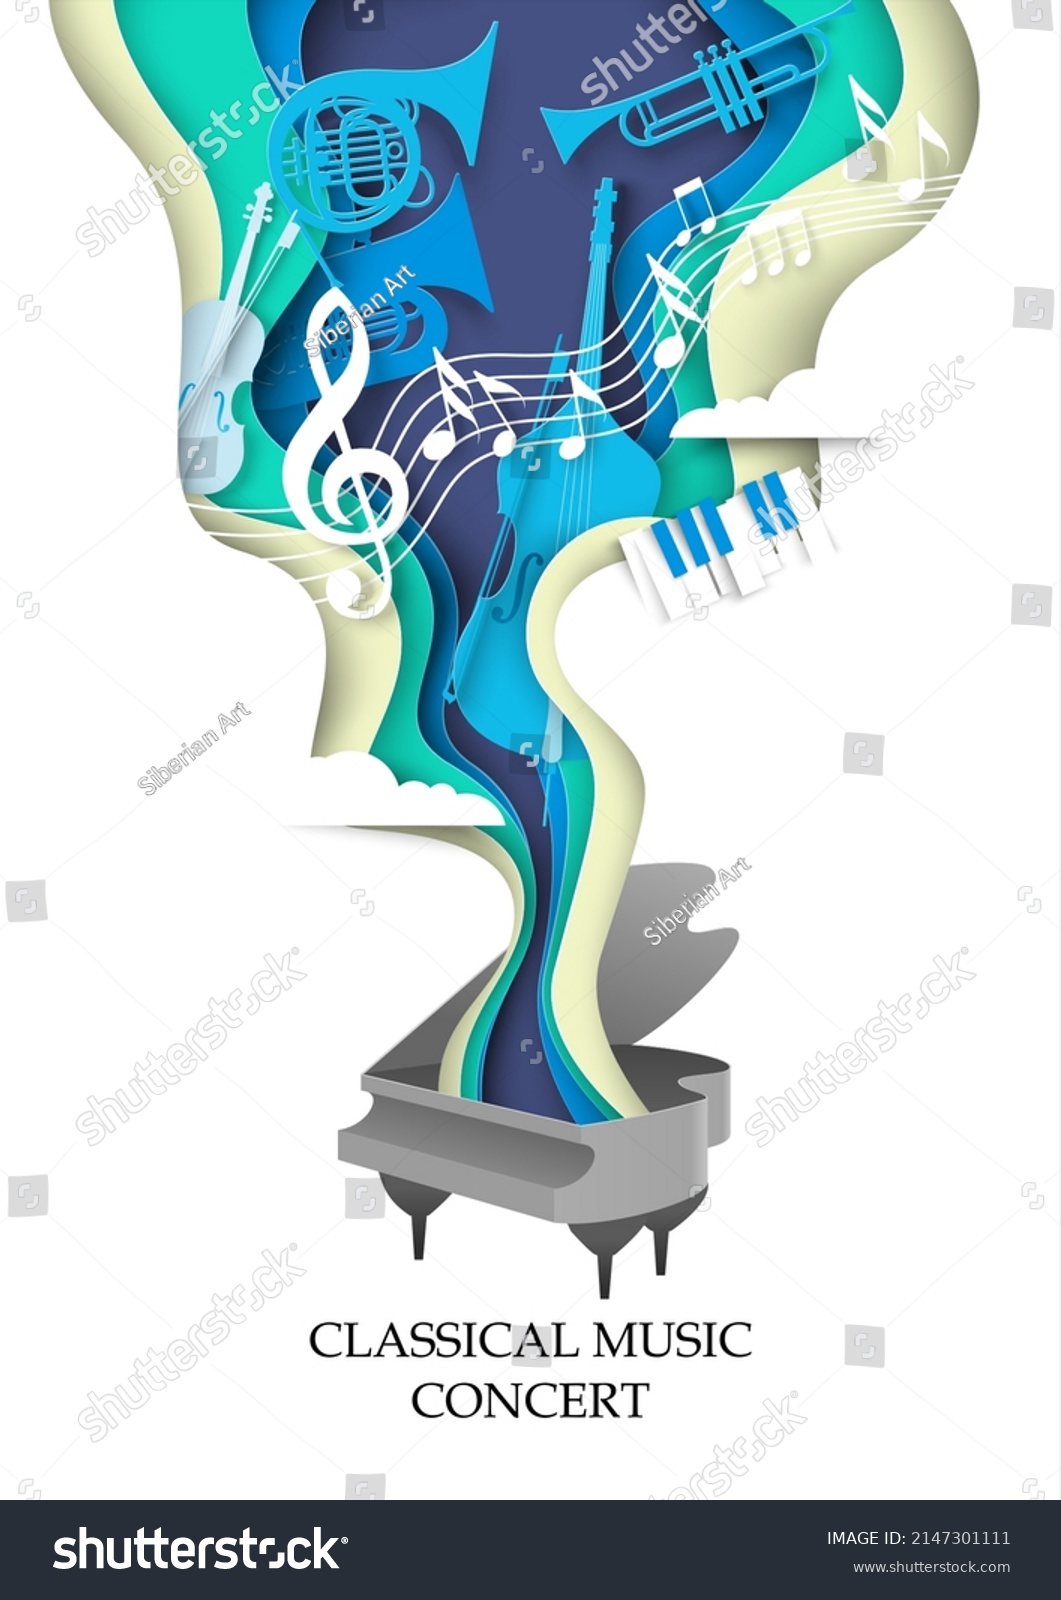 Classical music concert paper cut vector poster. Piano art design with different musical instrument and melody notes. Orchestra festival, acoustic or opera performance #2147301111